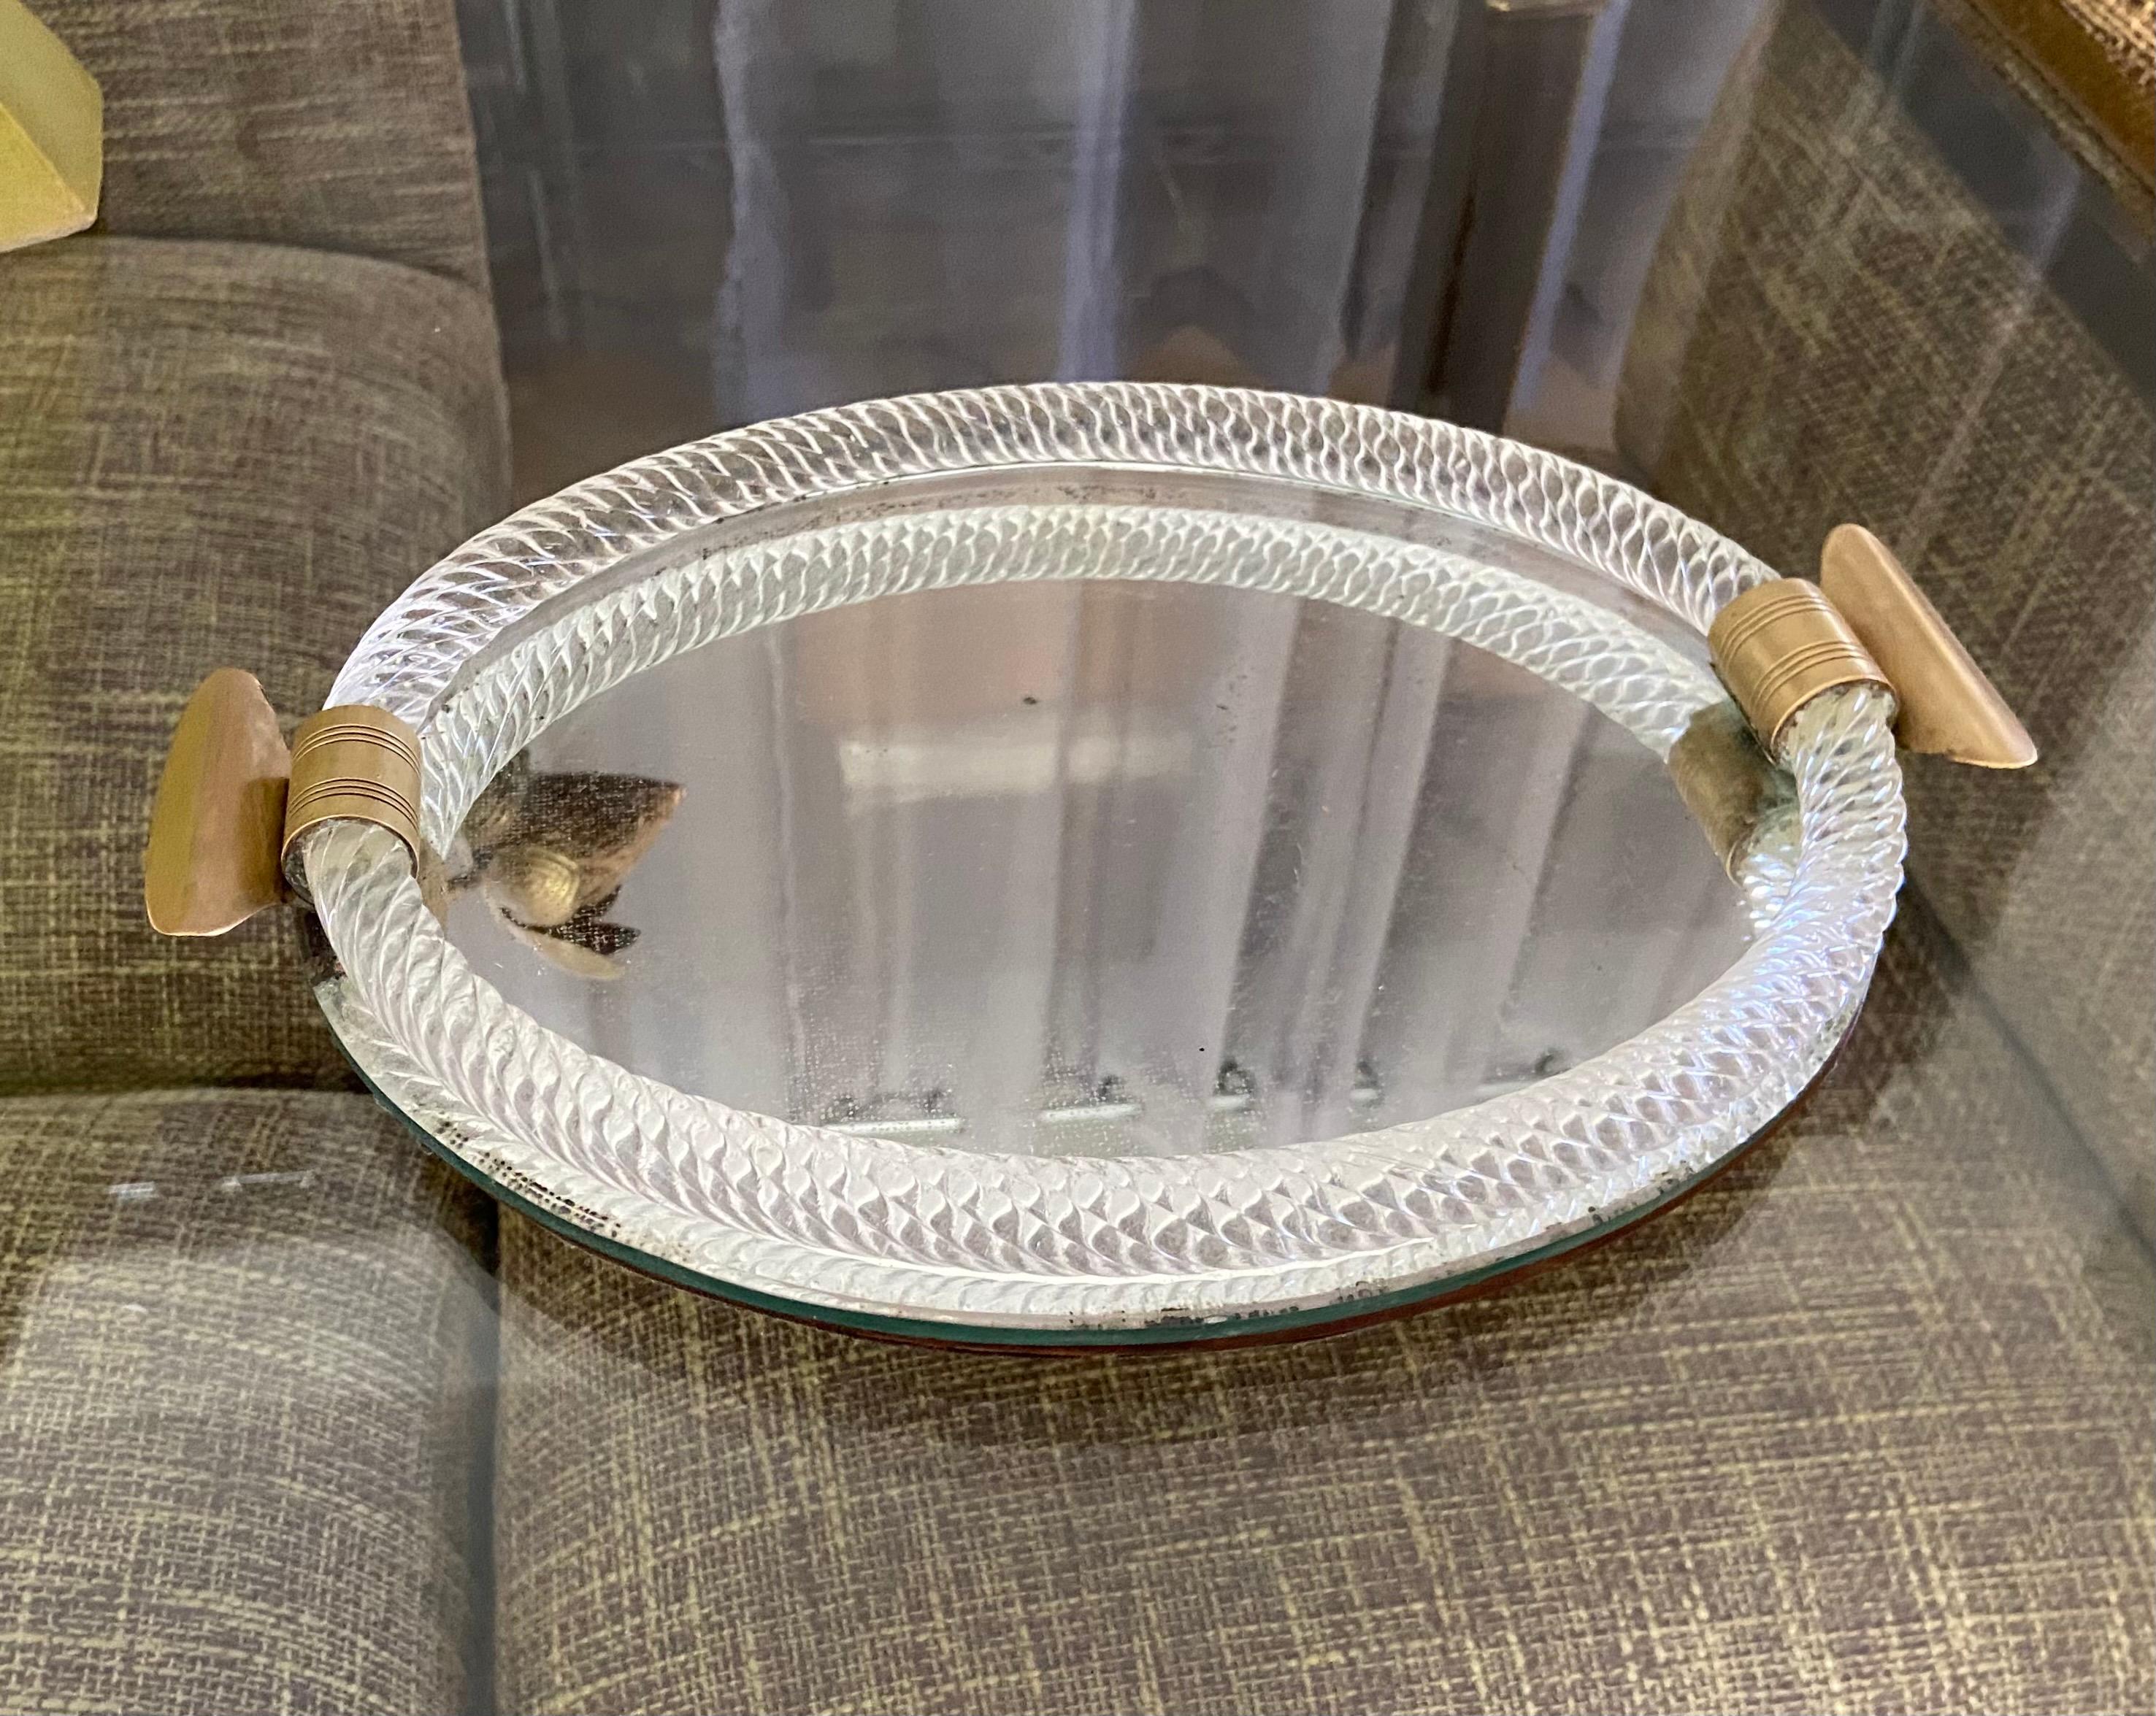 Smaller scale Murano oval shaped finely twisted clear glass vanity tray. Tray has nice solid brass fittings and mirrored glass bottom mounted on composite wood backing. (Width with handles 12.75